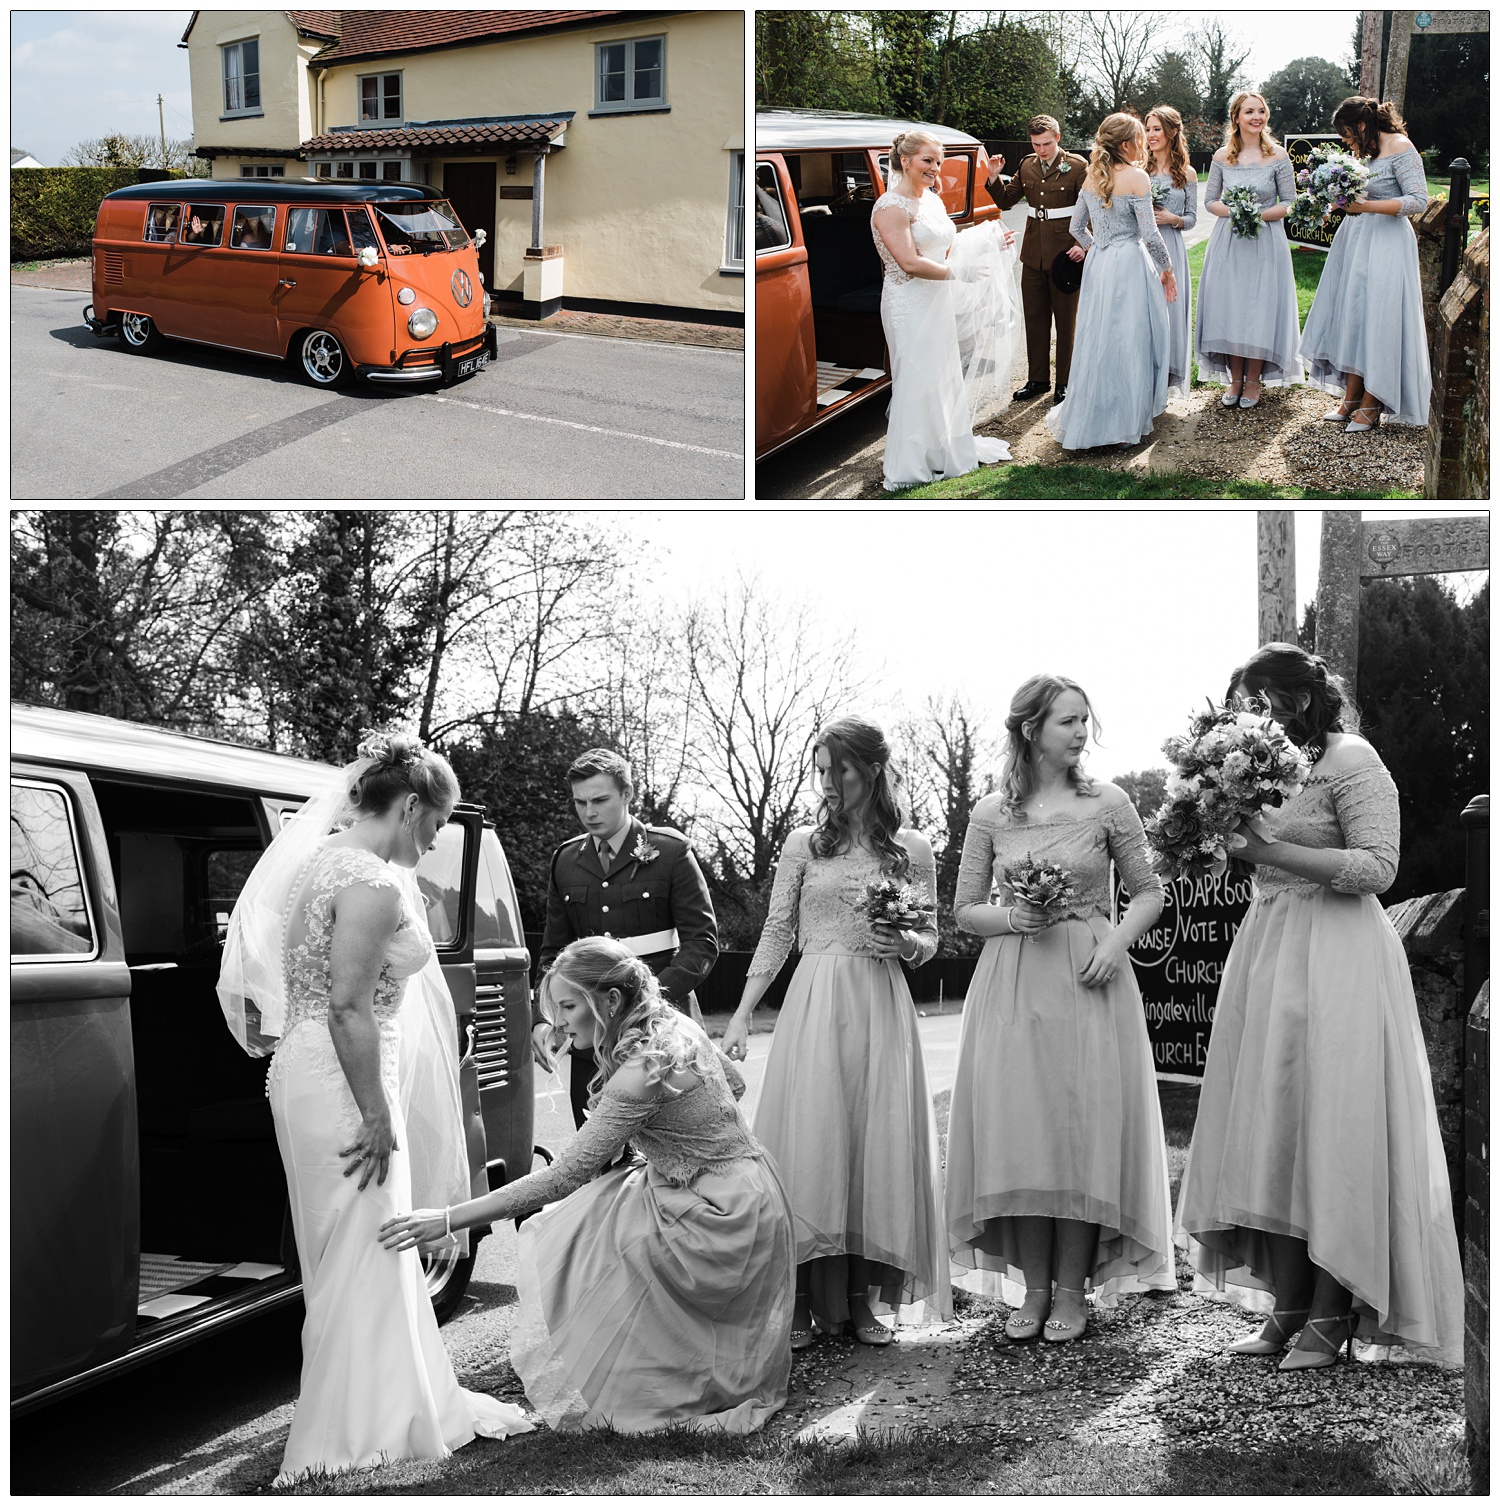 Bridesmaids helping bride with her dress after arriving in a burnt orange VW.